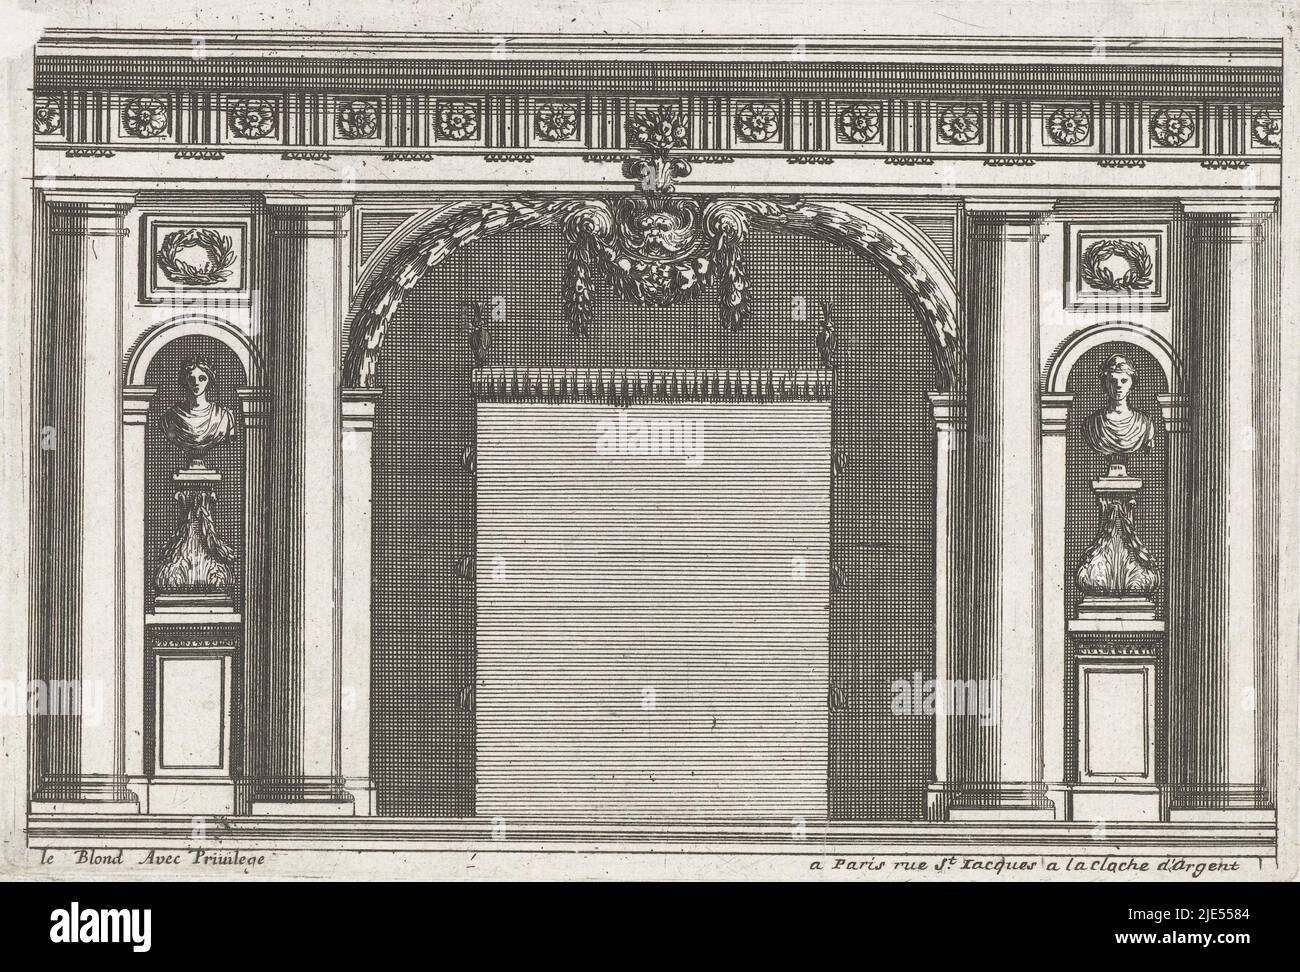 The wall is decorated with sunken Tuscan columns and busts on pedestals. From series of 6 sheets, Wall with narrow alcoves next to alcove Alkoven (series title)., print maker: Jean Lepautre, Jean Lepautre, publisher: Jean Leblond (I), (mentioned on object), print maker: France, (possibly), France, (possibly), publisher: Paris, c. 1650, paper, etching, h 135 mm × w 199 mm Stock Photo